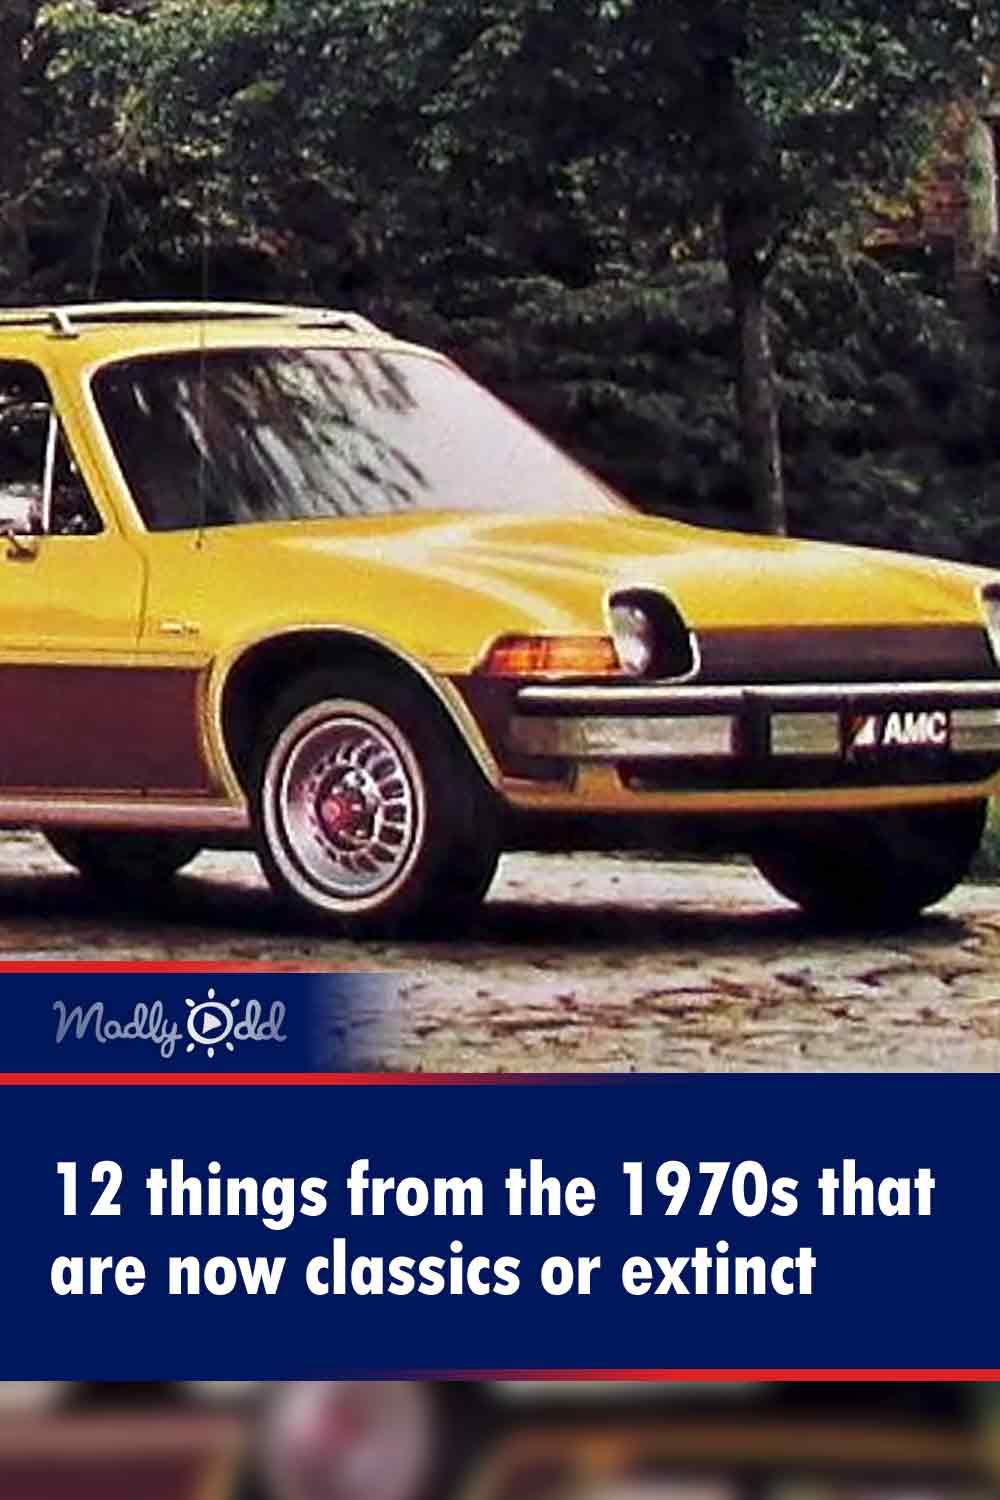 12 things from the 1970s that are now classics or extinct